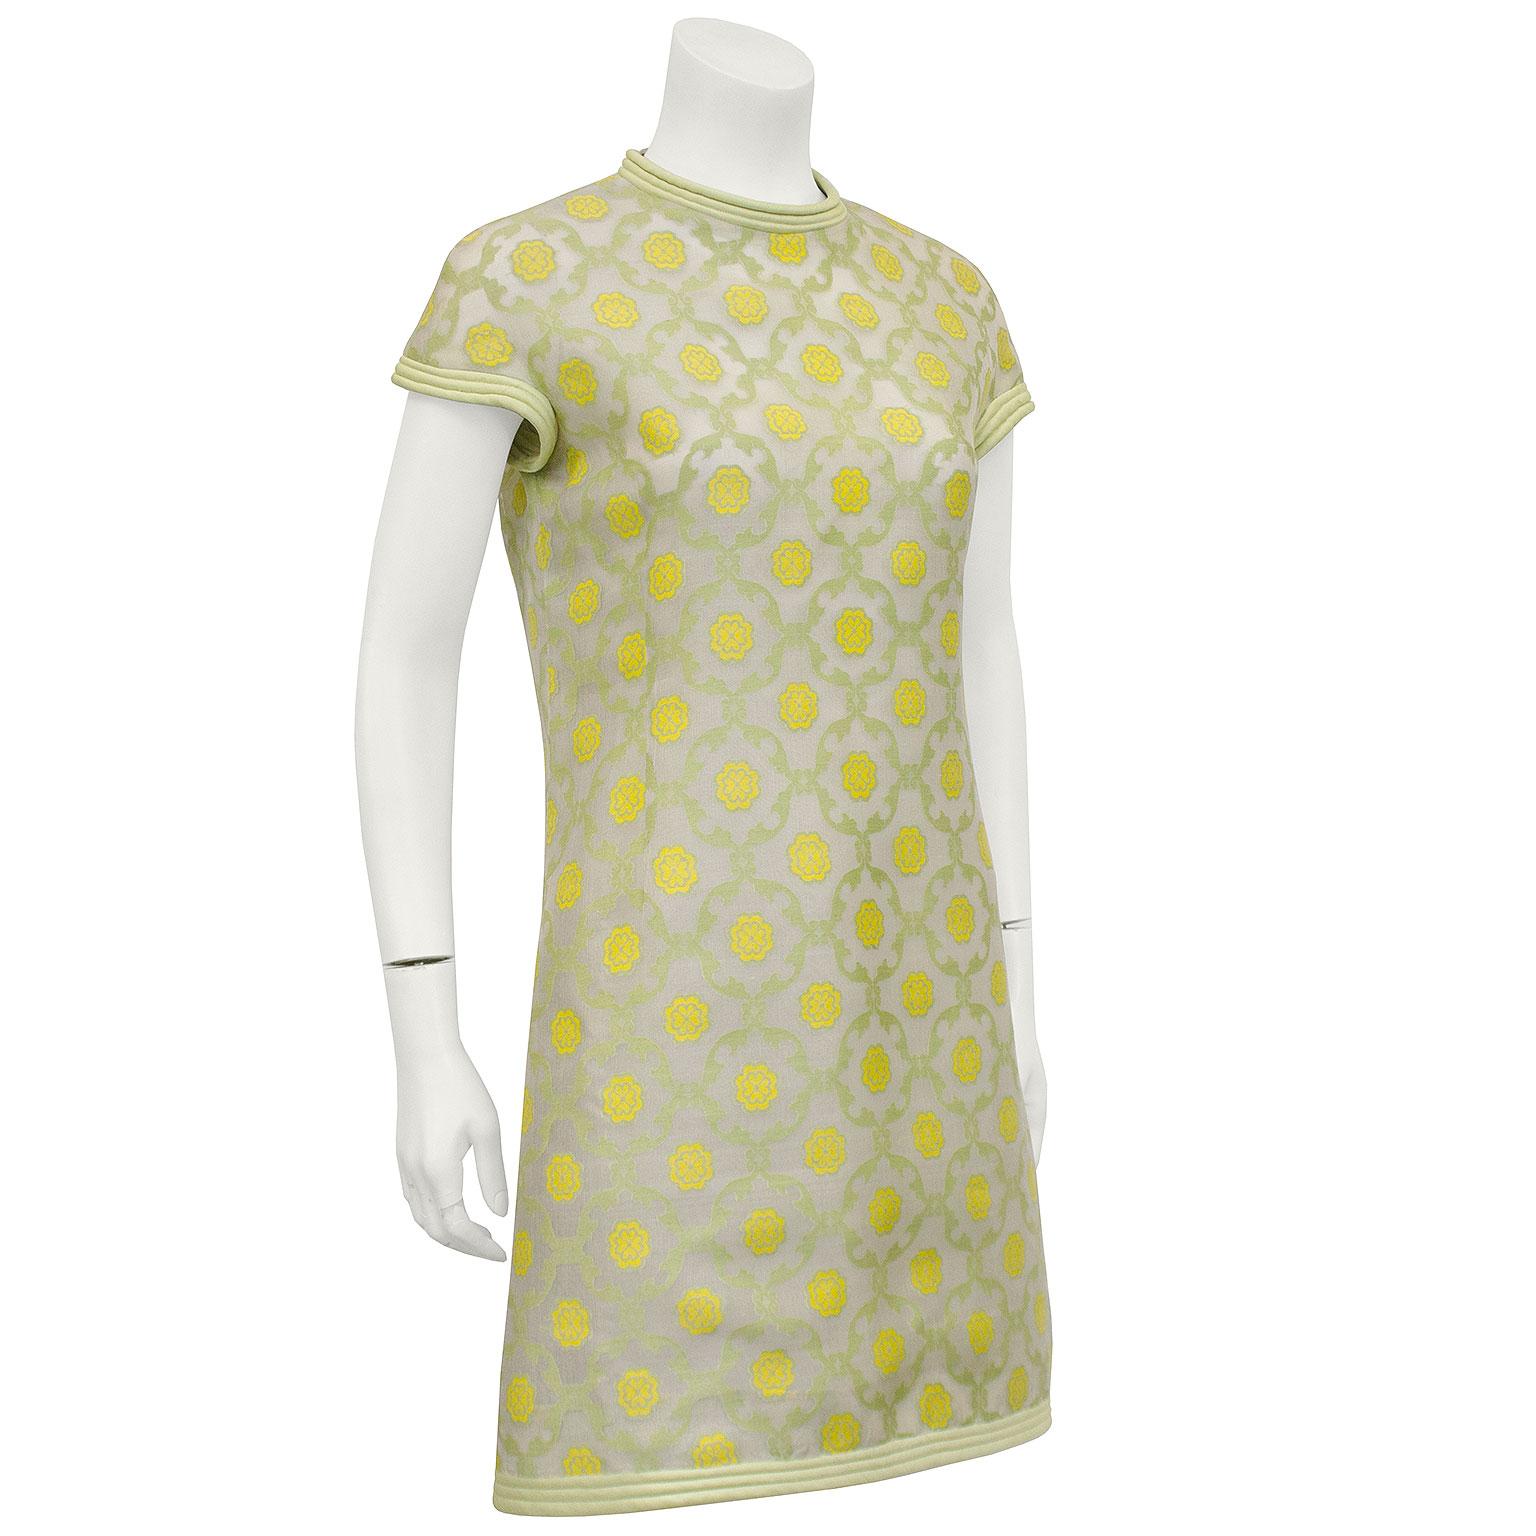 Pierre Cardin demi couture chartreuse floral silk dress from 1967. The slightly sheer silk organza, that was hand woven in India, is covered in an all over print of chartreuse diamond garlands with yellow flowers in the centers. The neckline, cuffs